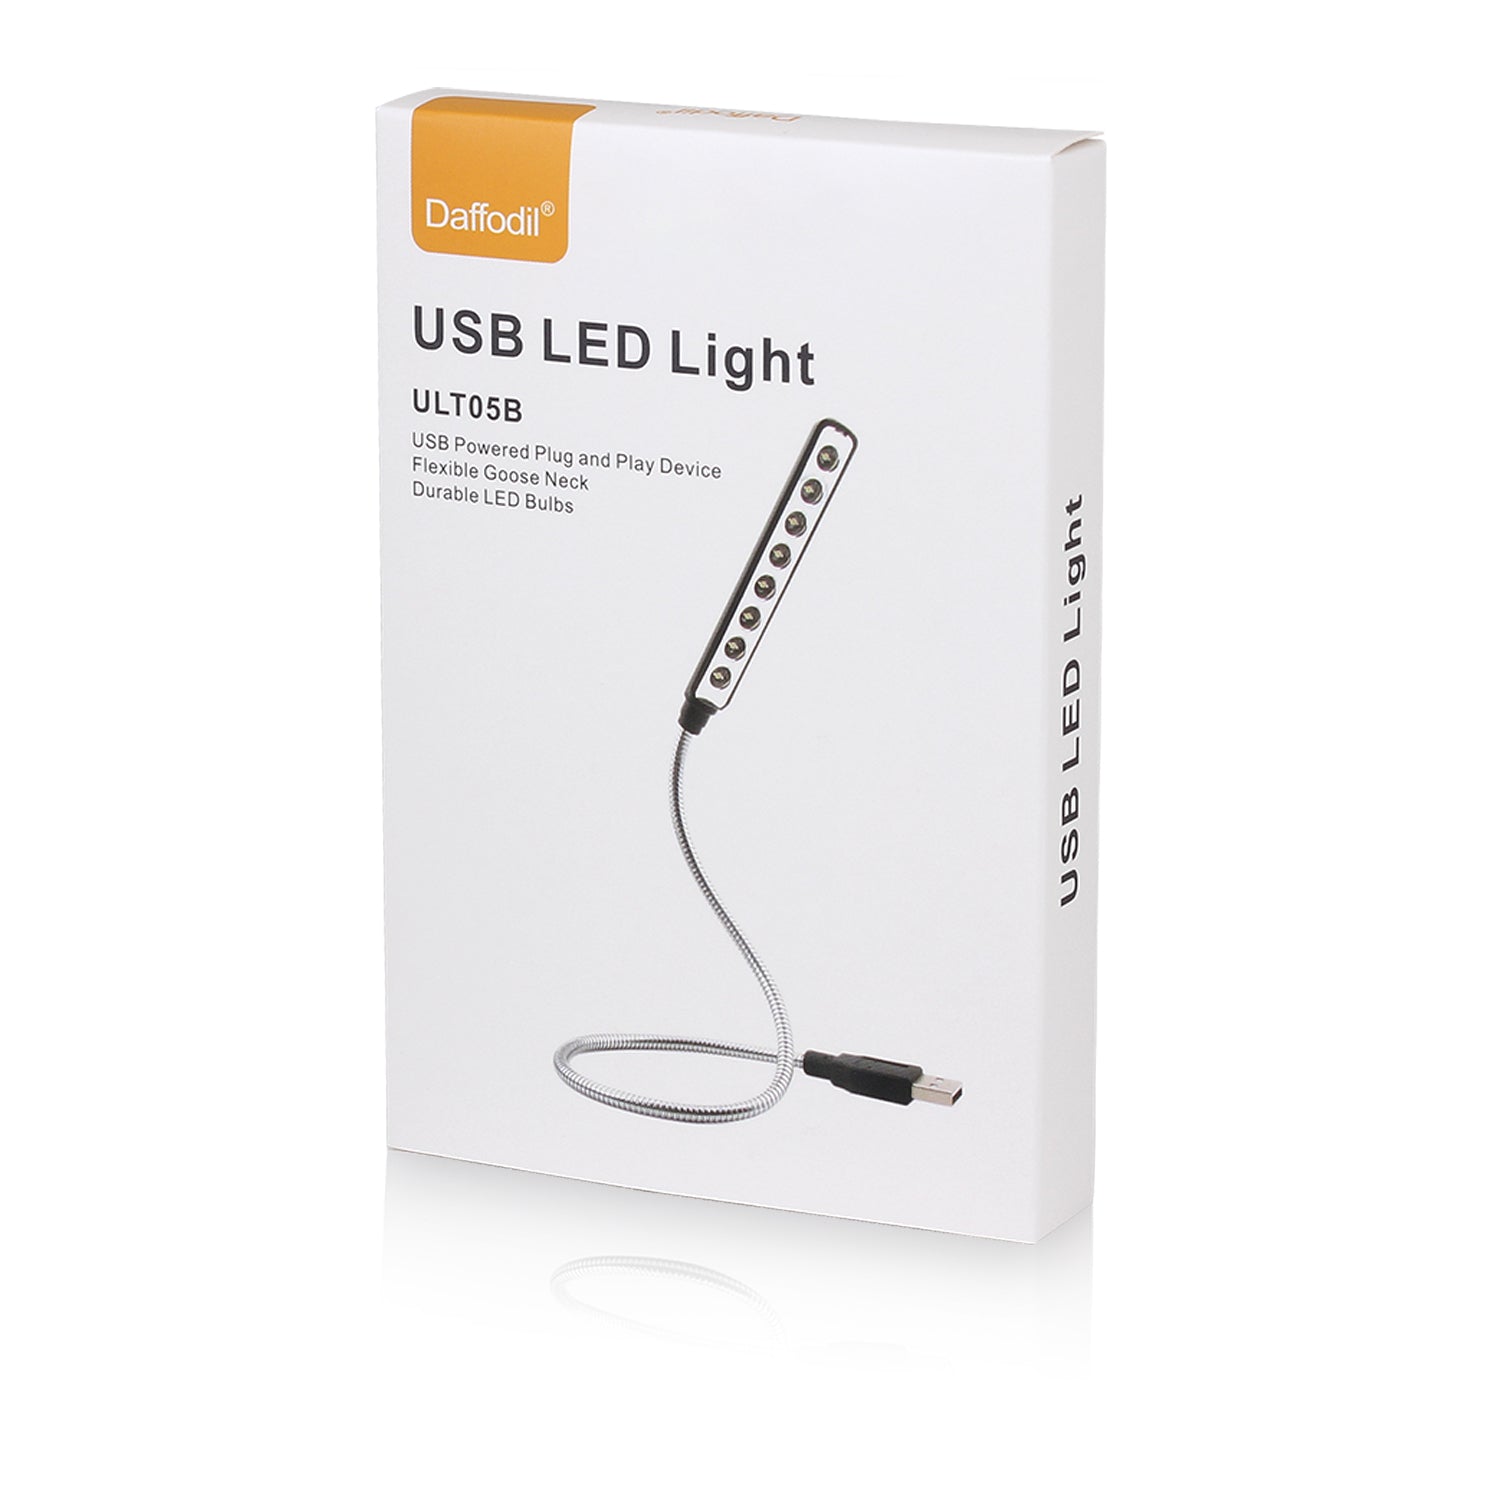 Daffodil USB LED Light - 8 Super Bright LED Reading Lamp - No Batteries  Needed - PC & Mac Compatible (ULT05 Silver)